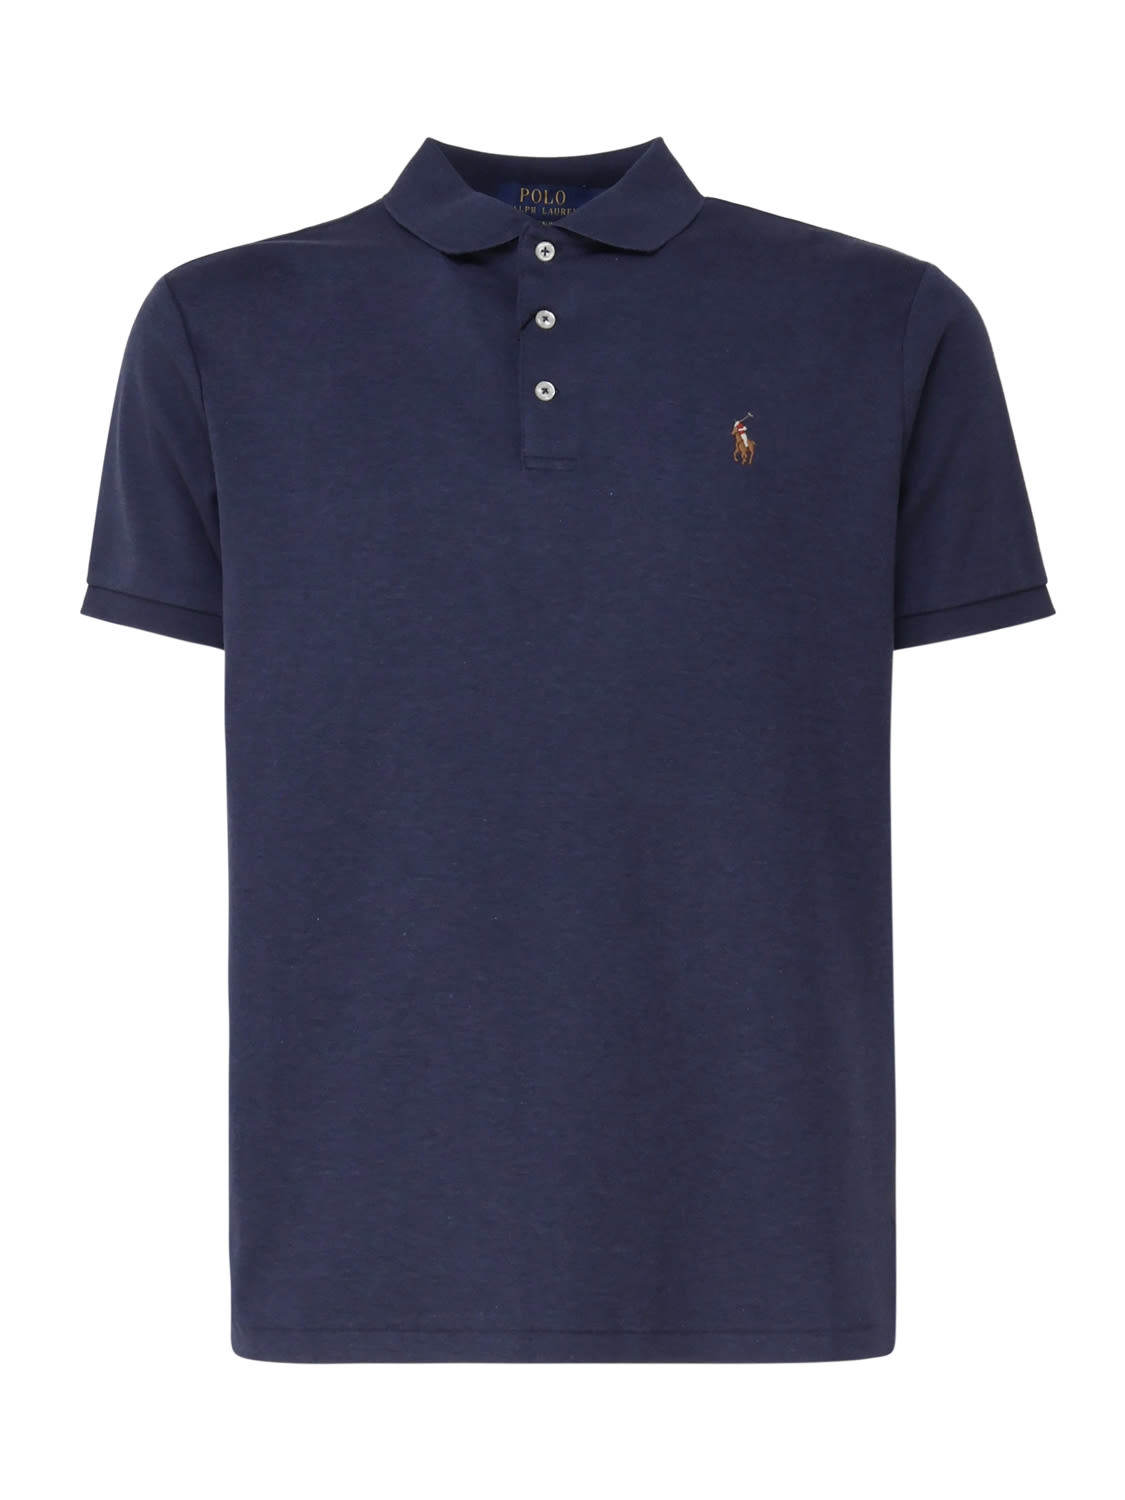 POLO RALPH LAUREN POLO SHIRT WITH EMBROIDERY